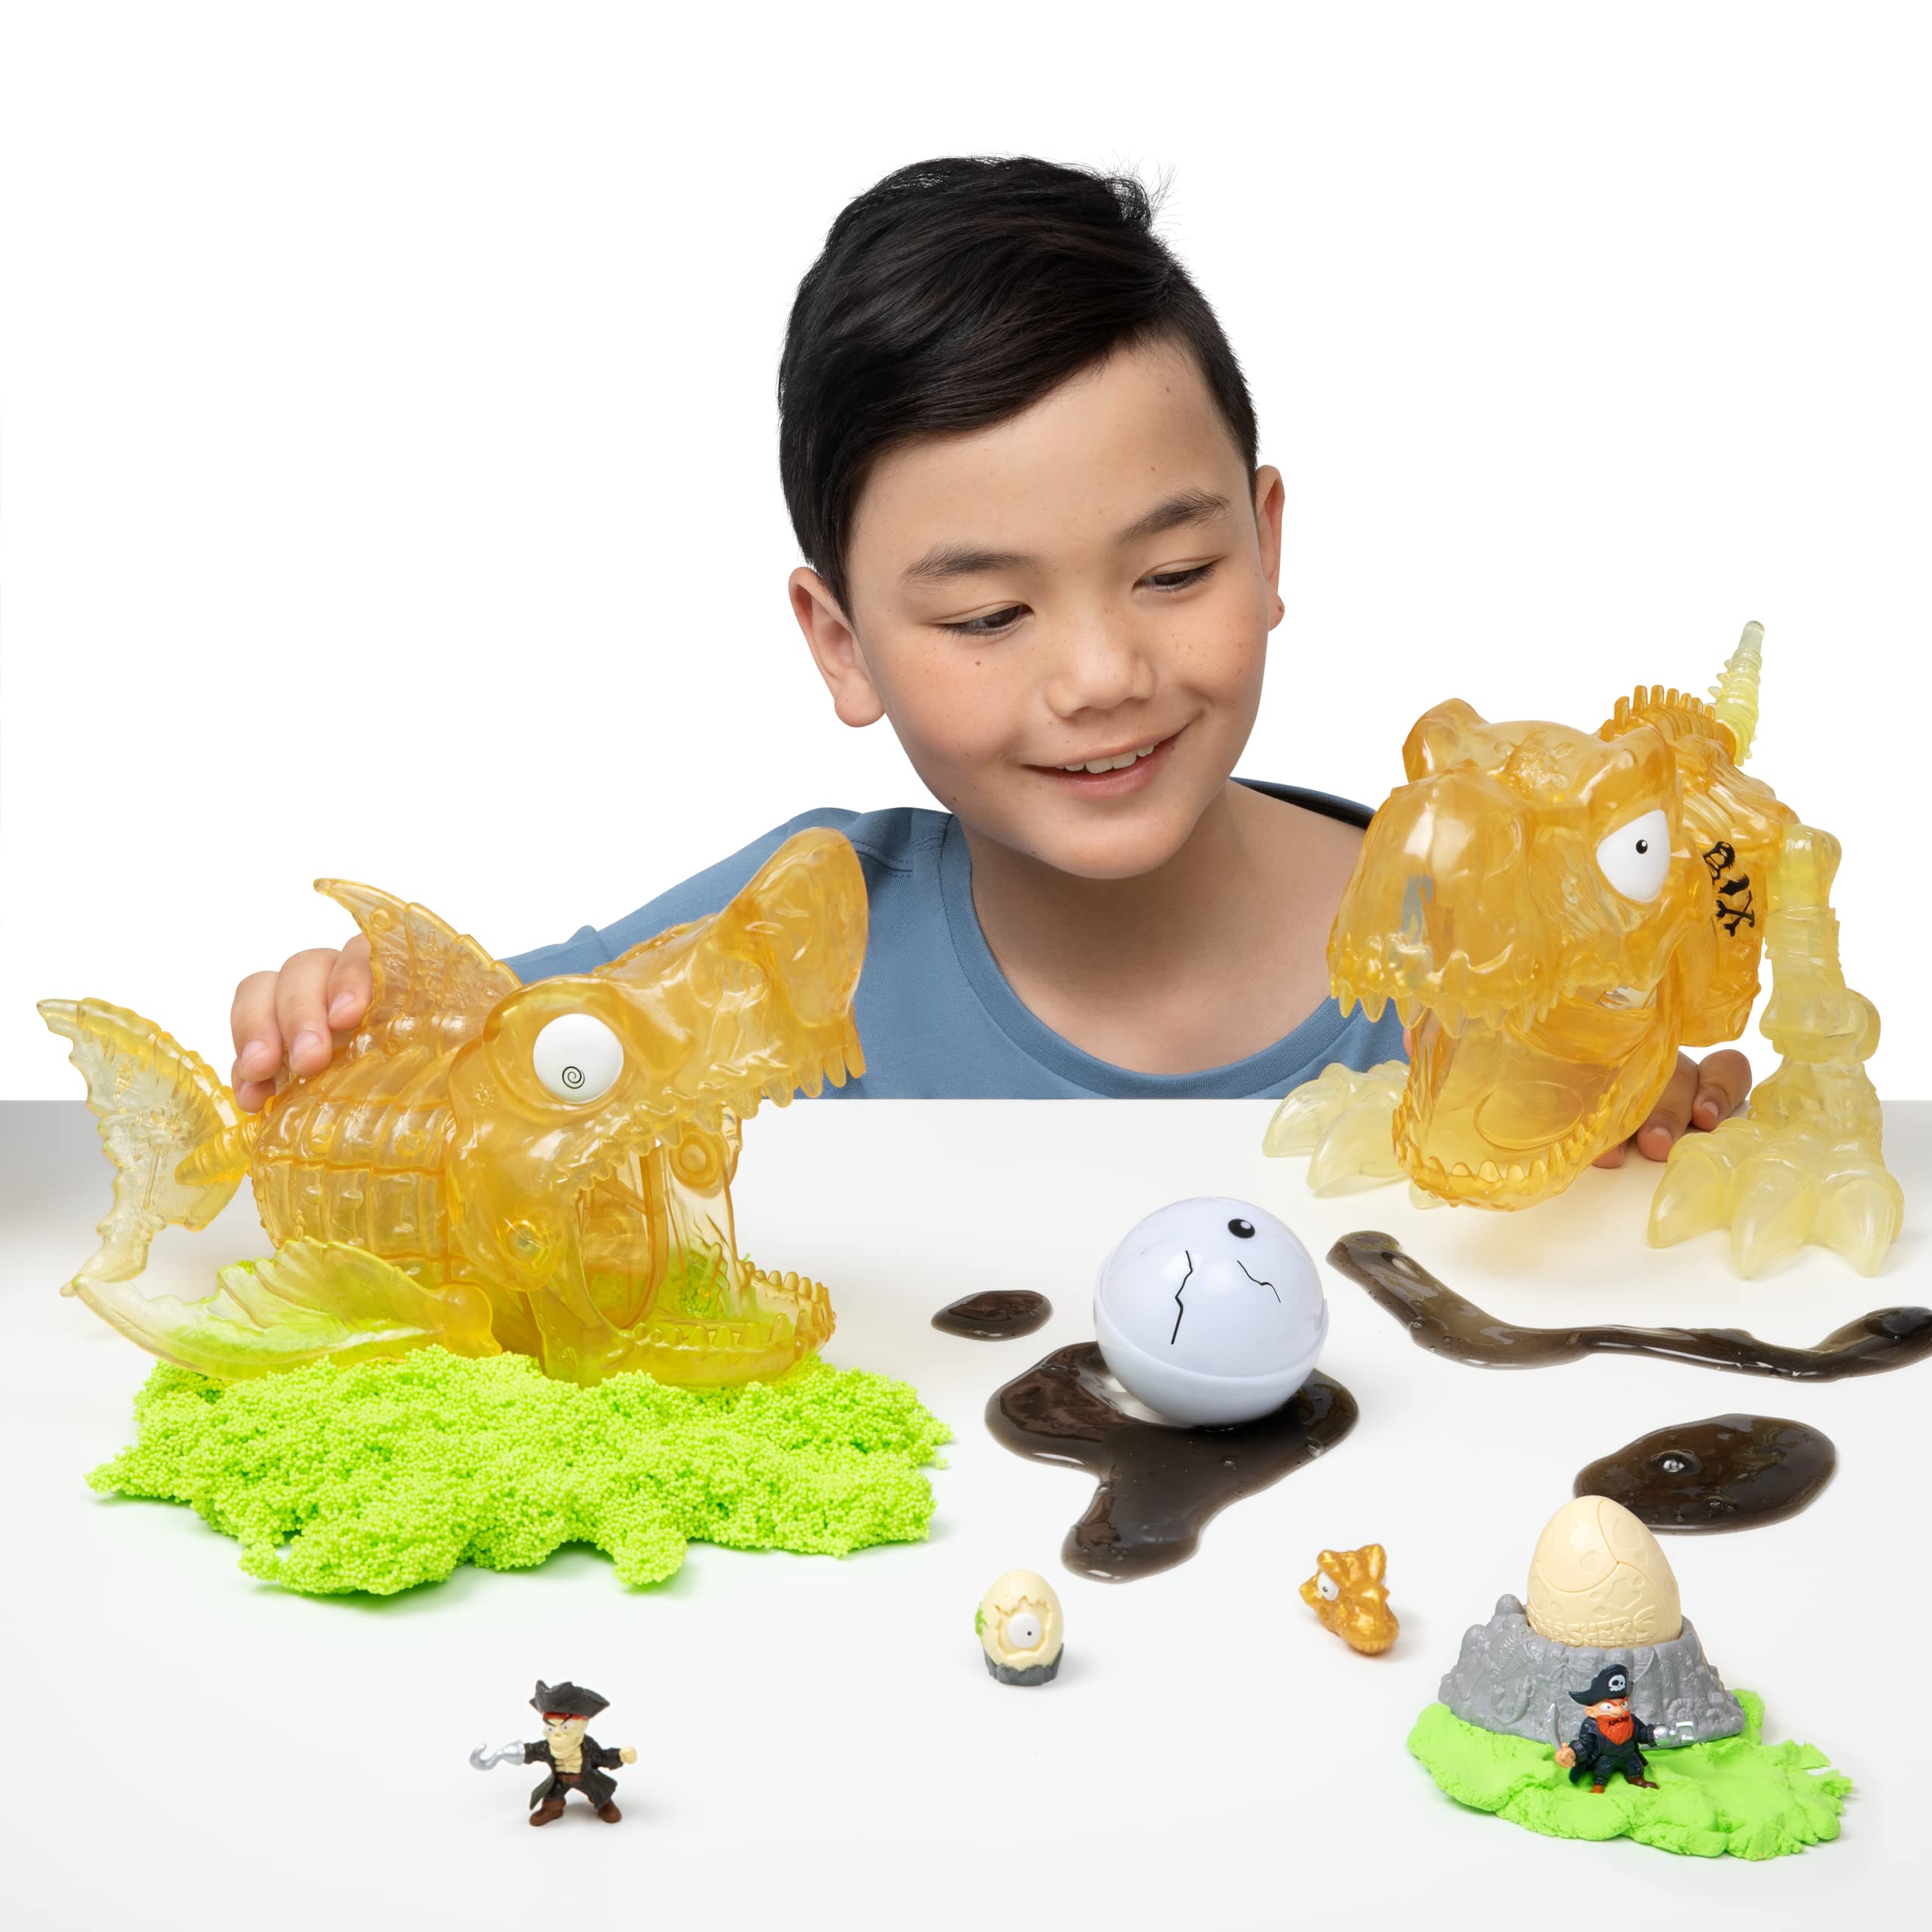 Smashers Dino Island Giant Skull by ZURU - Includes 30+ Surprises, Kids Toys Filled with Mini Dinosaur Toys, Slime, Sand, Eggs, Figurines and More (Megalodon Shark), Ages 5+